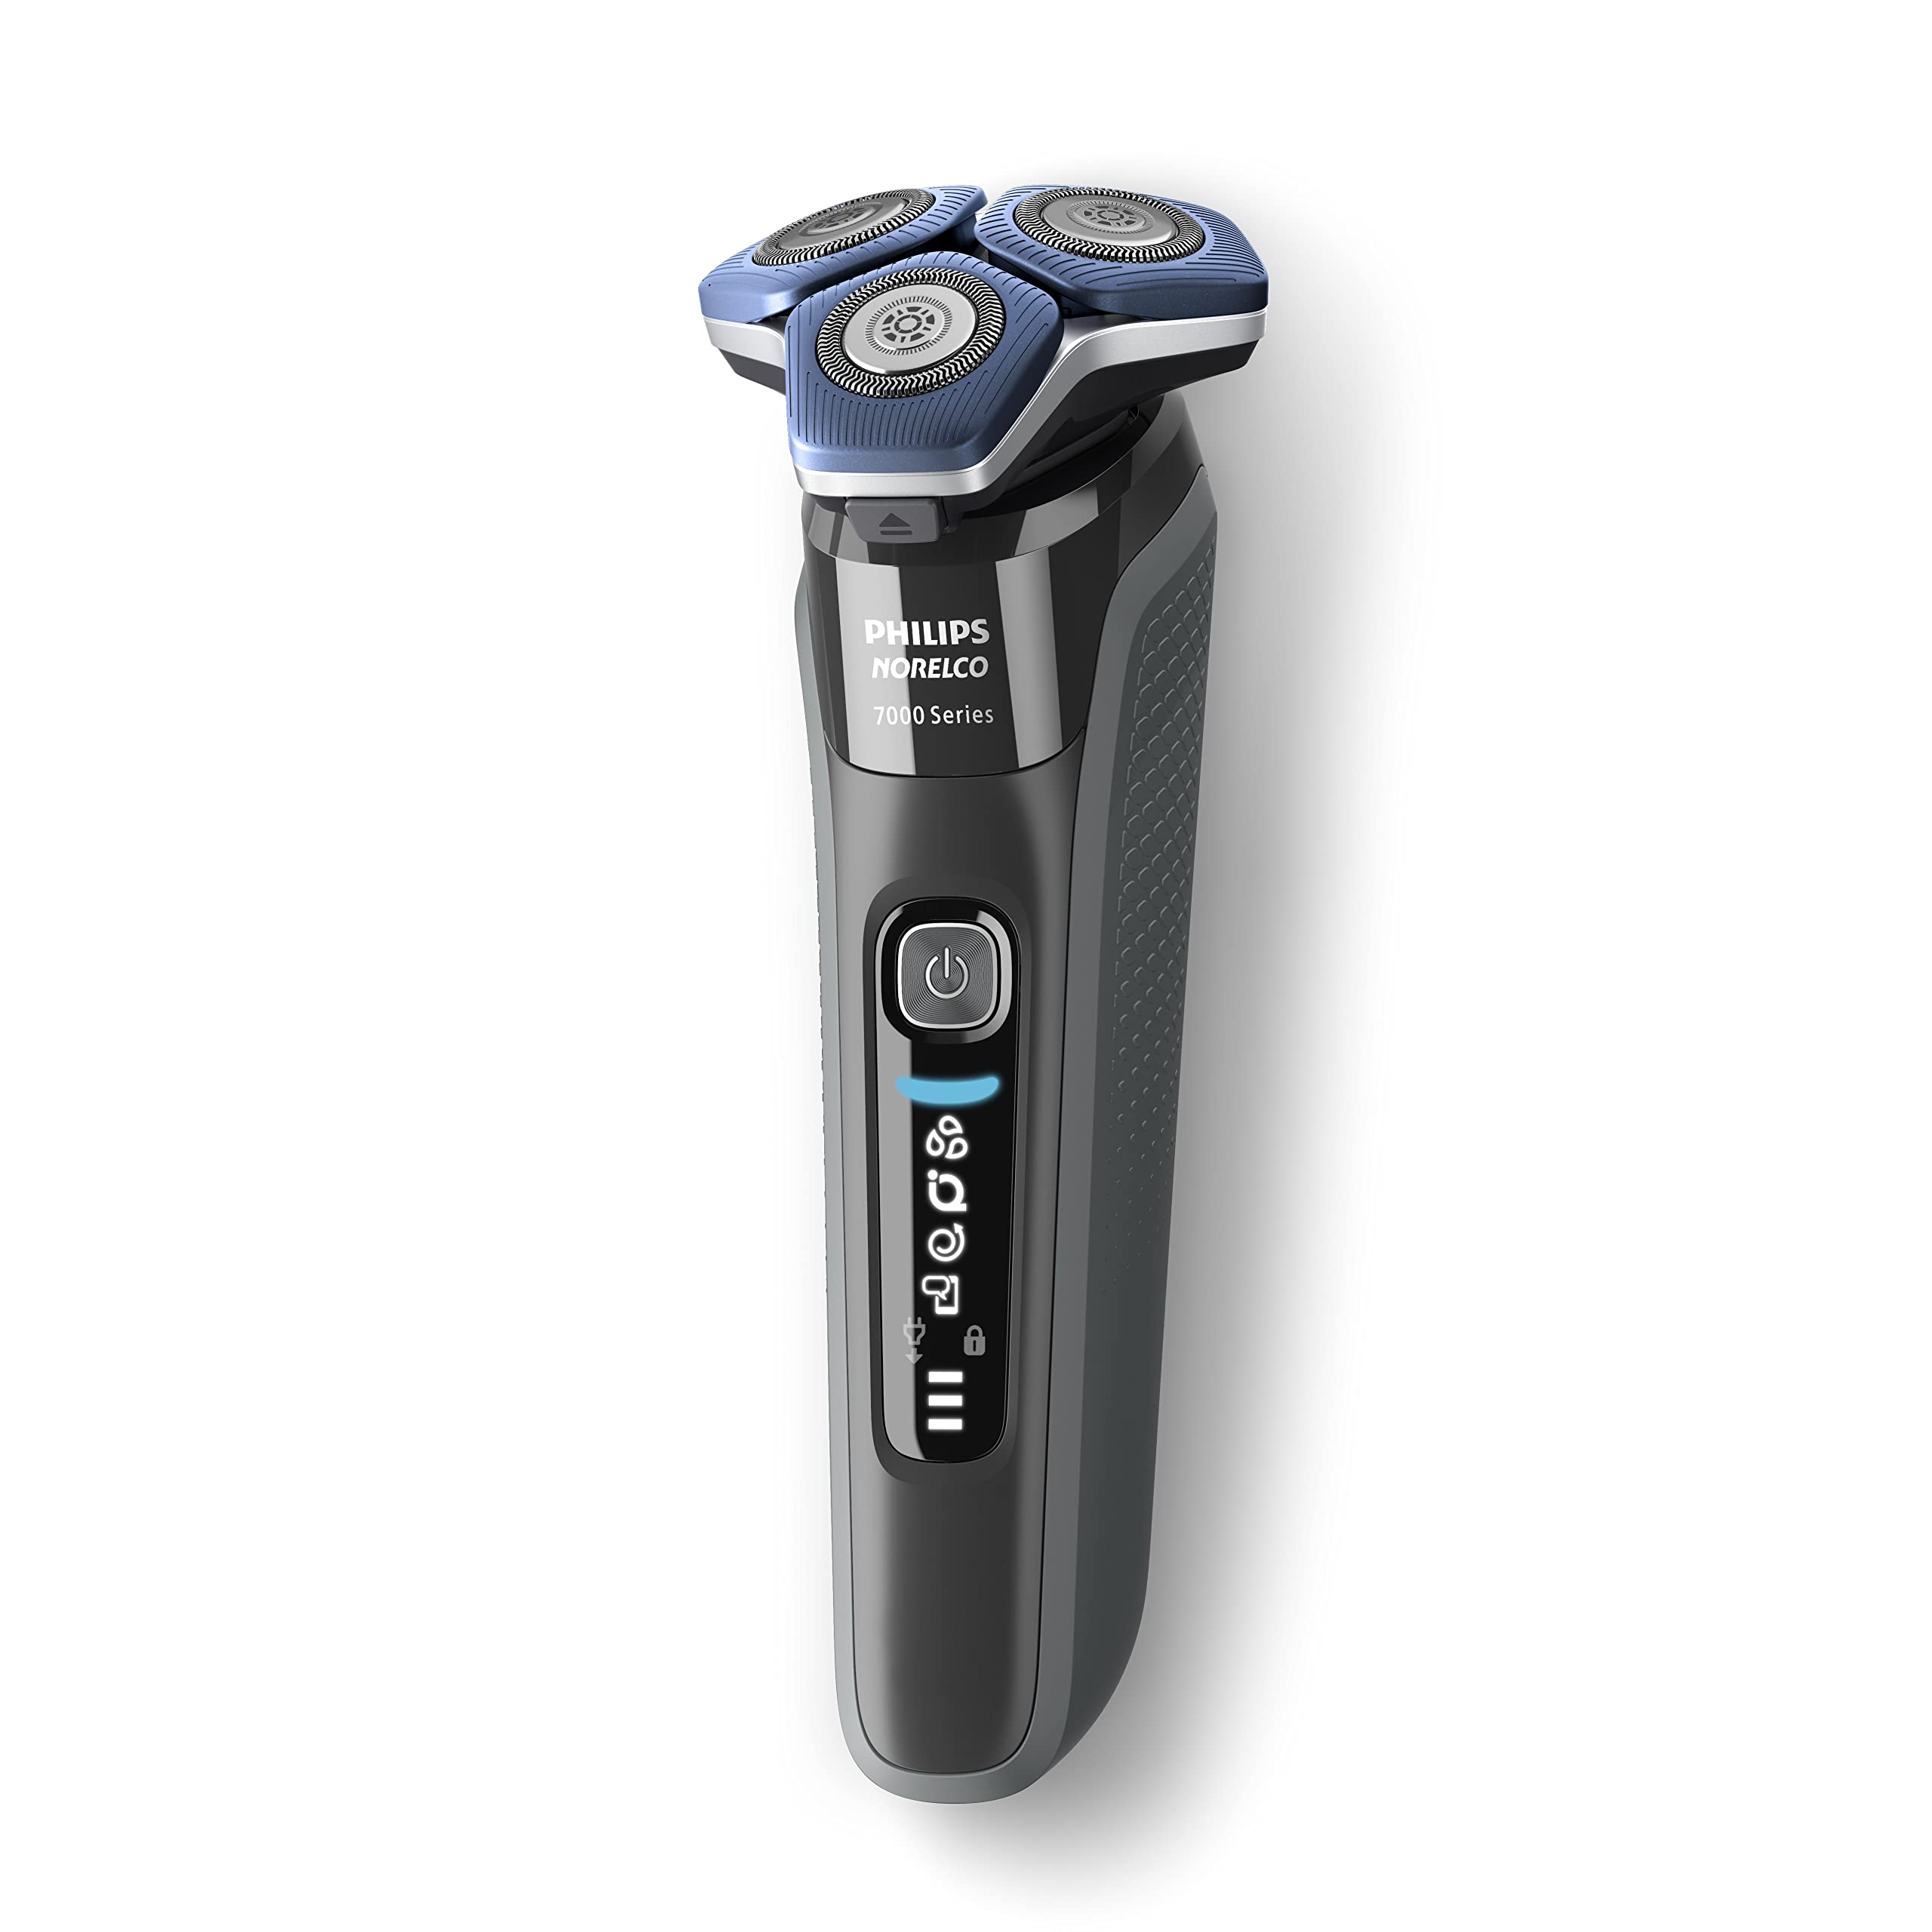 Philips Norelco Shaver 7200, Rechargeable Wet & Dry Electric Shaver with SenseIQ Technology and Pop-up Trimmer S7887/82